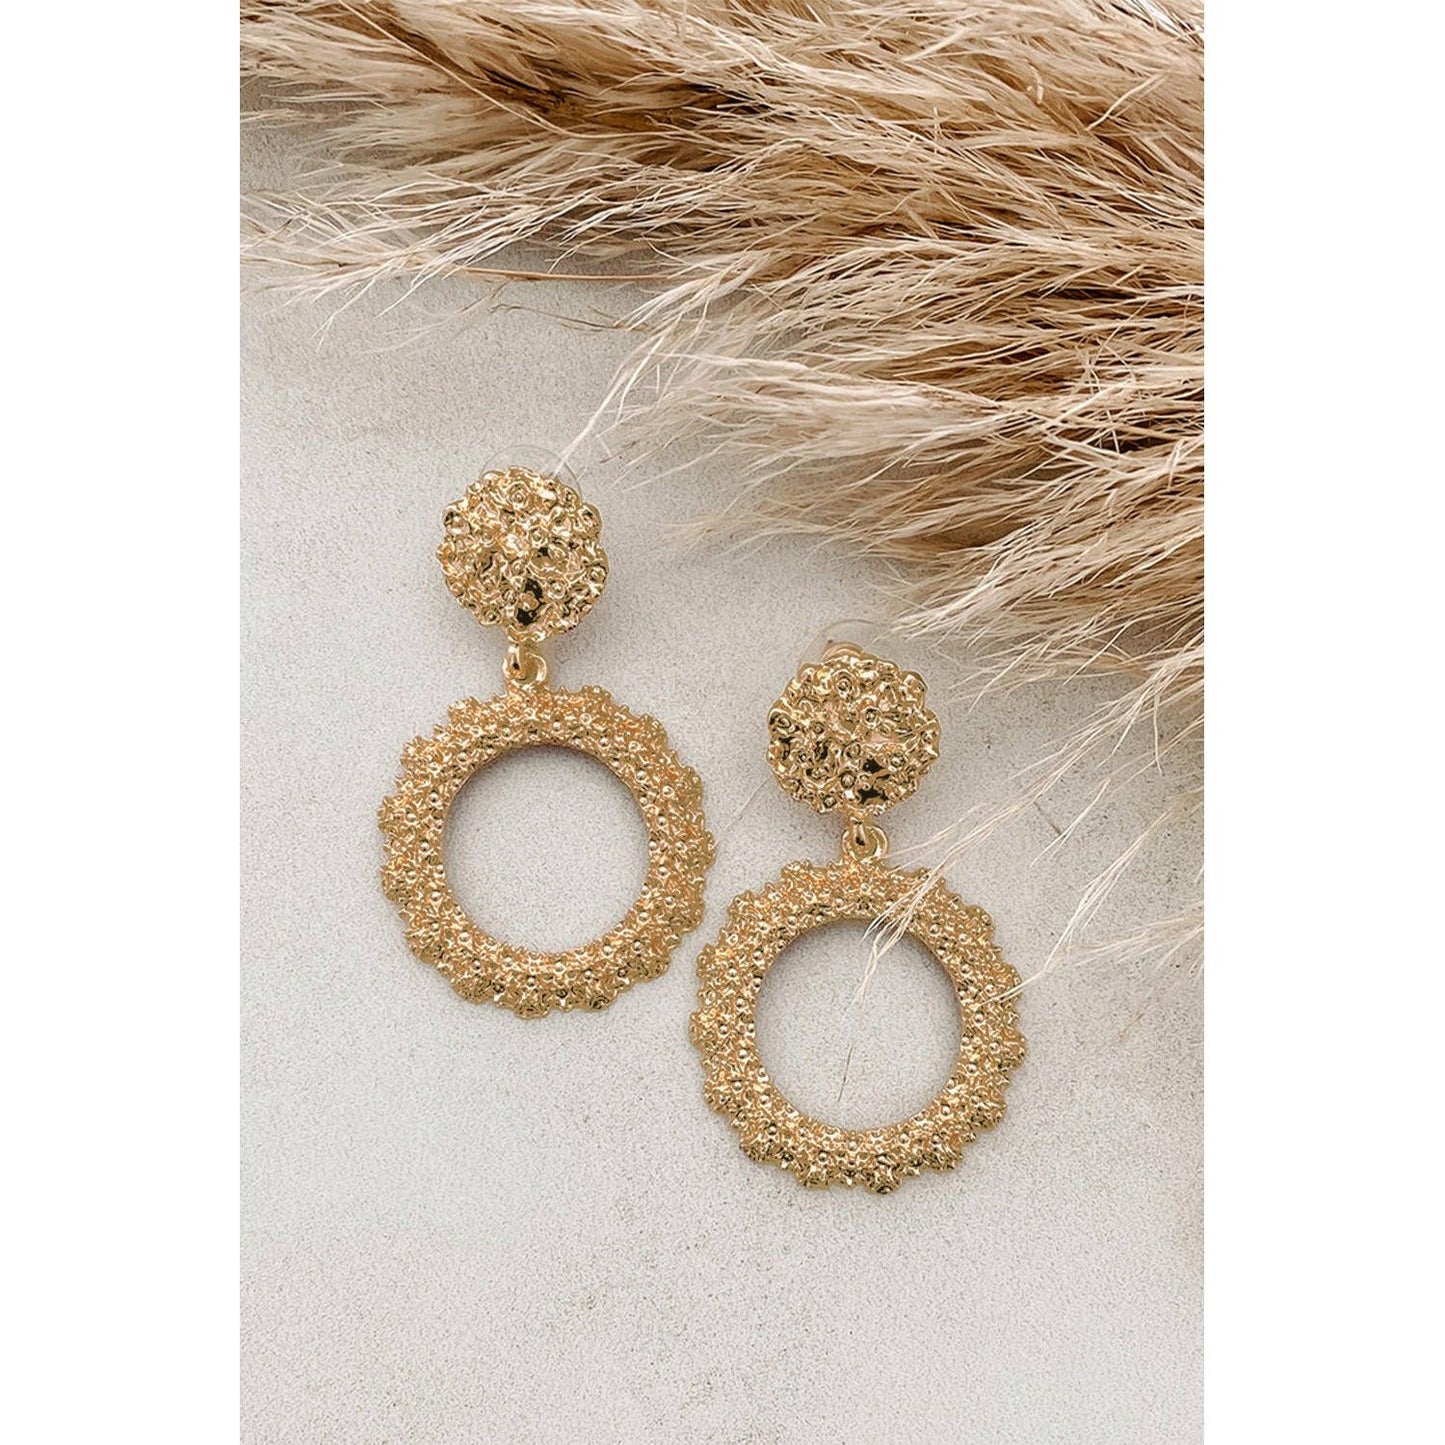 Gold Metal Charm Geometric Pattern Hollow Out Hanging Earrings